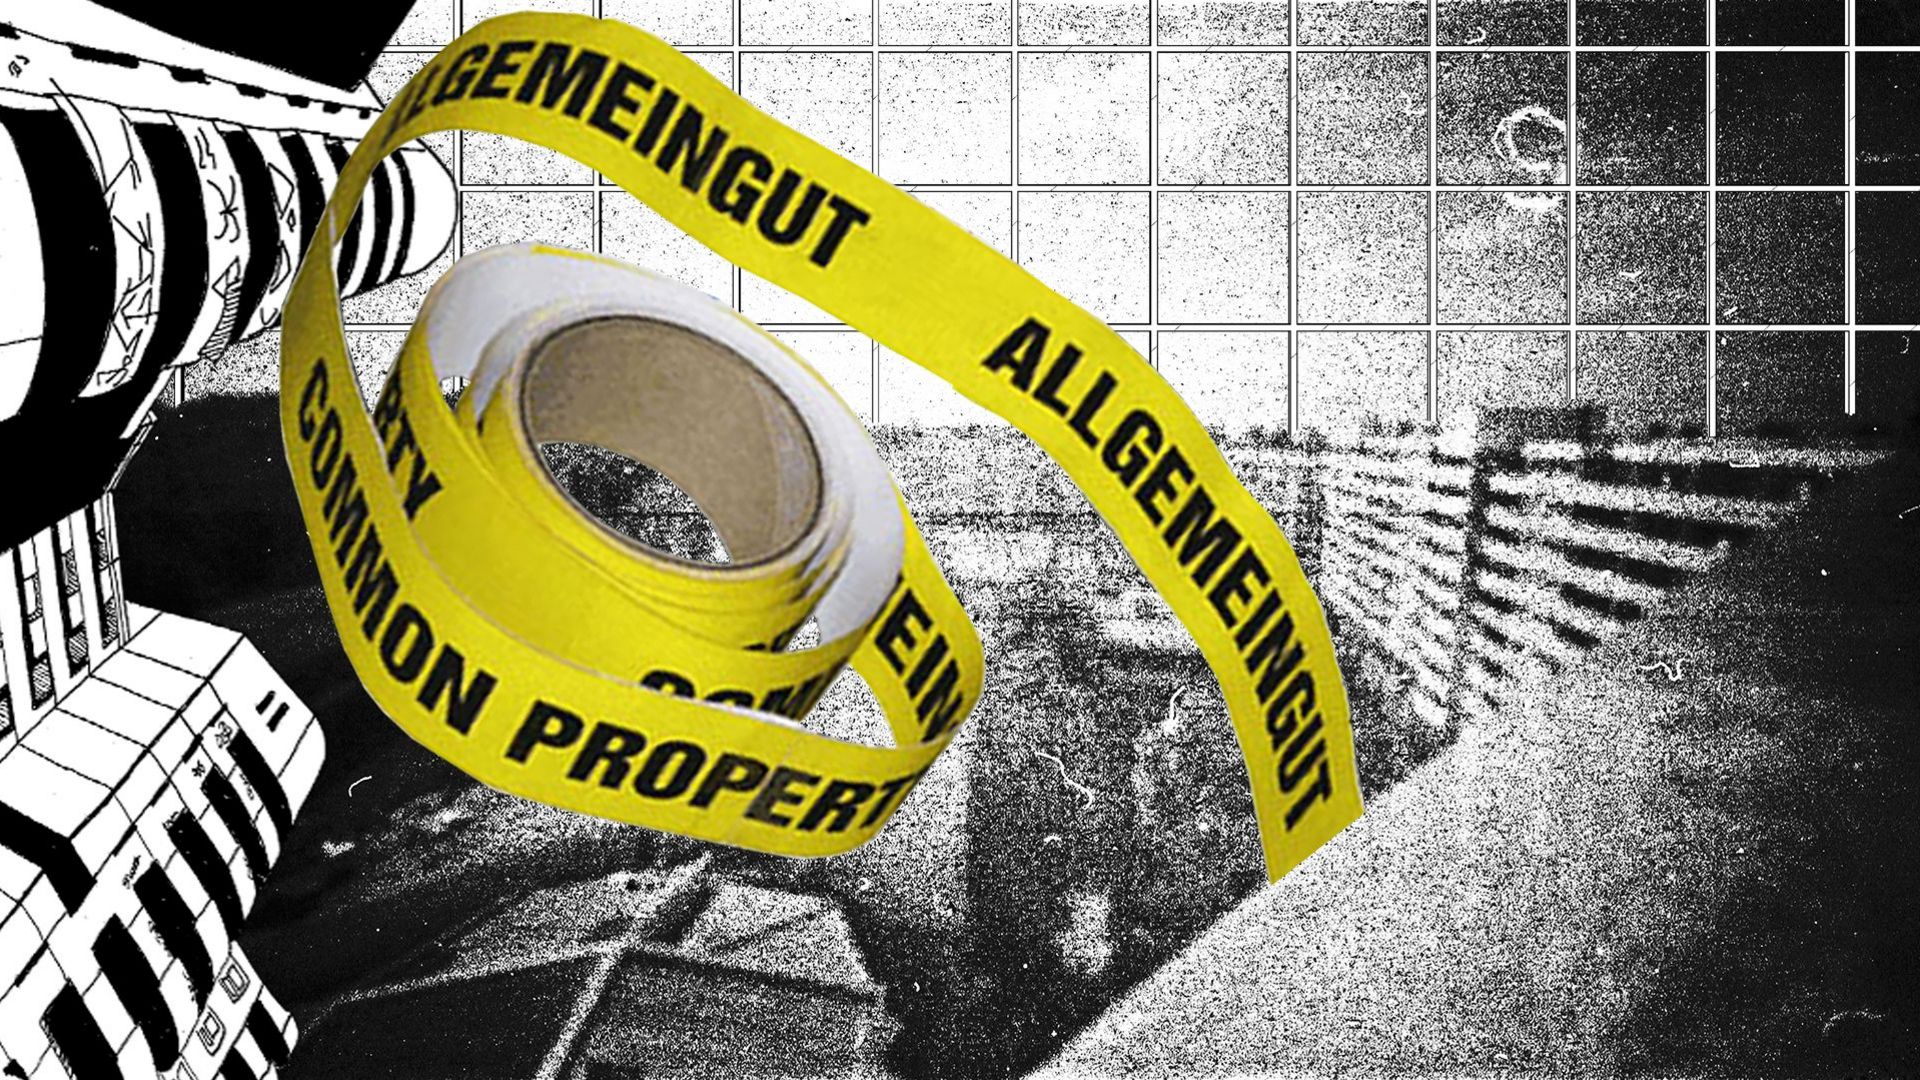 Collage: Parts of the Kotti (Kottbusser Tor) building and tiles can be seen in black and white print. The foreground shows a bright yellow adhesive roll with the inscription "Allgemeingut / Common Property".